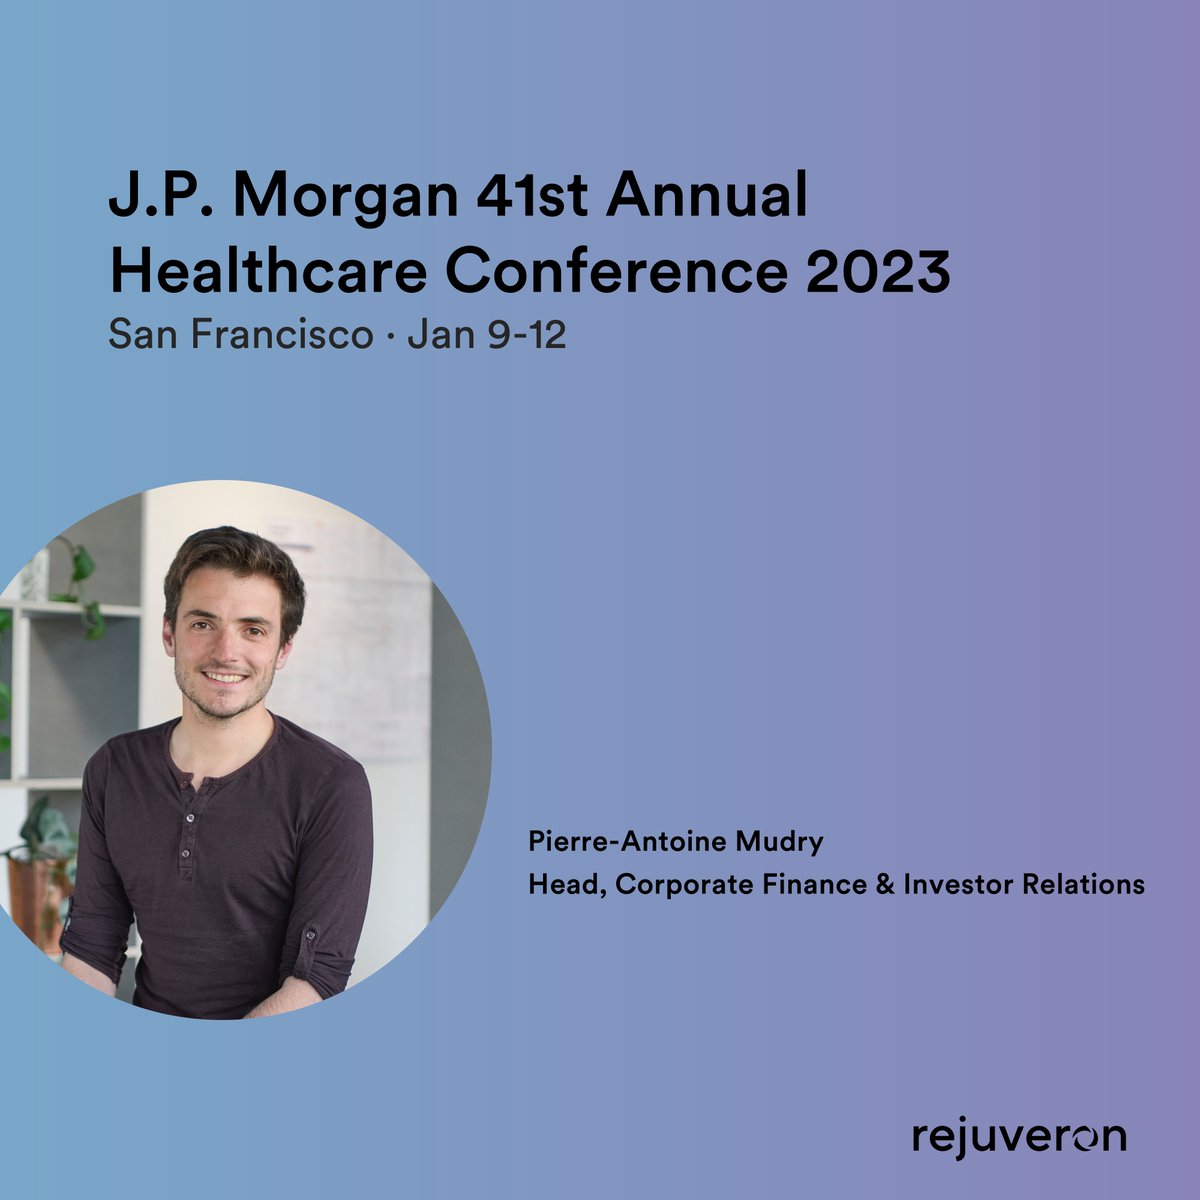 Day one! What an amazing experience to be part of #JPM2023 in San Francisco. We’re eager to shape the future of #healthcare and #therapeutics together! Please reach out to our Head, Corporate Finance & Investor Relations, @mudry_pierre, if you’d like to connect.